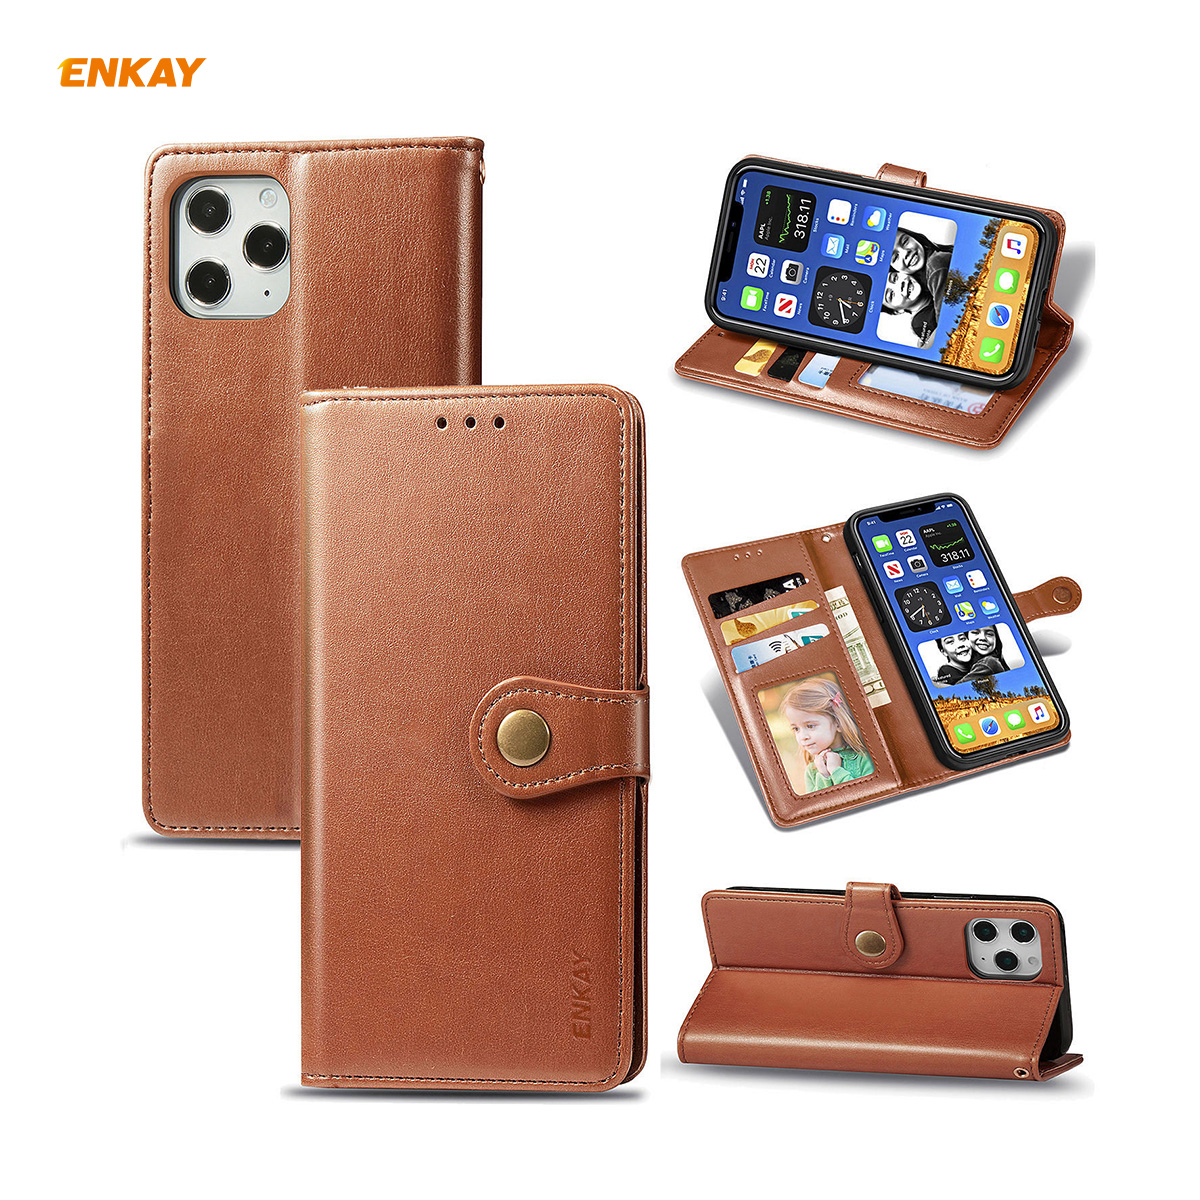 Enkay-for-iPhone-12-Pro-Max-Case-Retro-Litchi-Pattern-Flip-with-Mutiple-Card-Slots-Wallet-Stand-PU-L-1755116-13